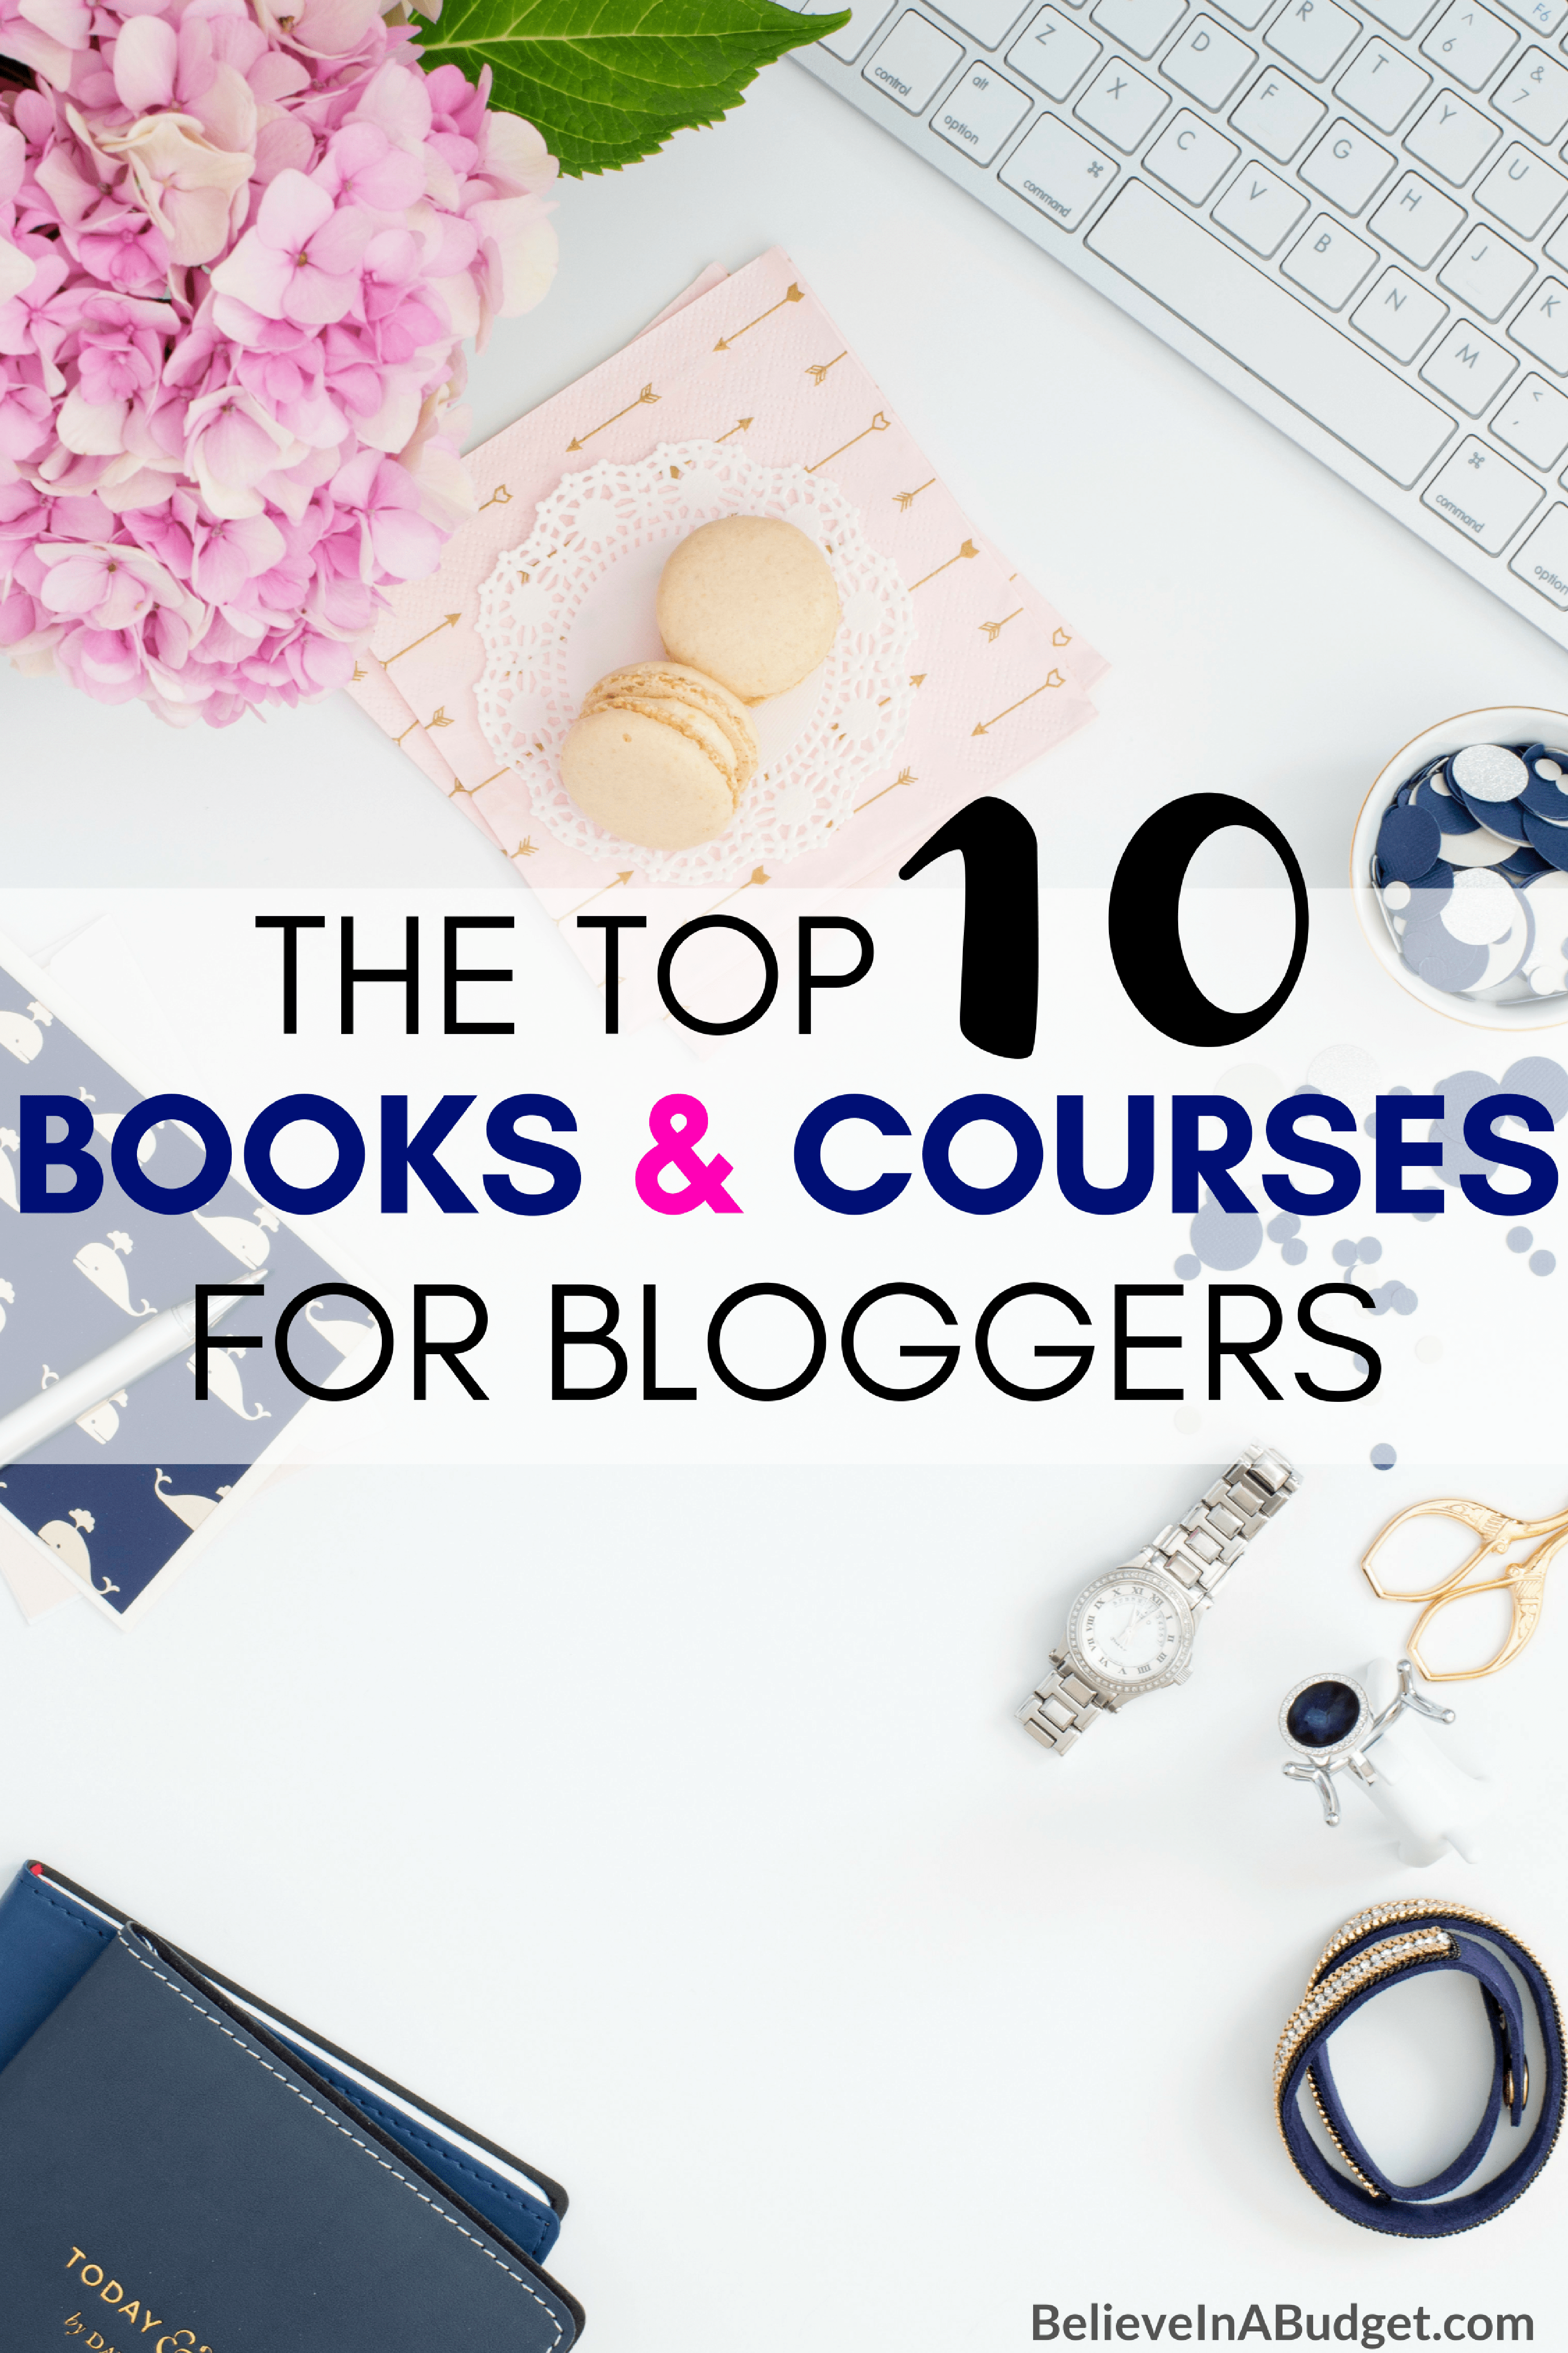 These are the best books and courses for bloggers, business owners and anyone who wants to get organized. These will help you start a freelance business, make extra money and get out of debt!